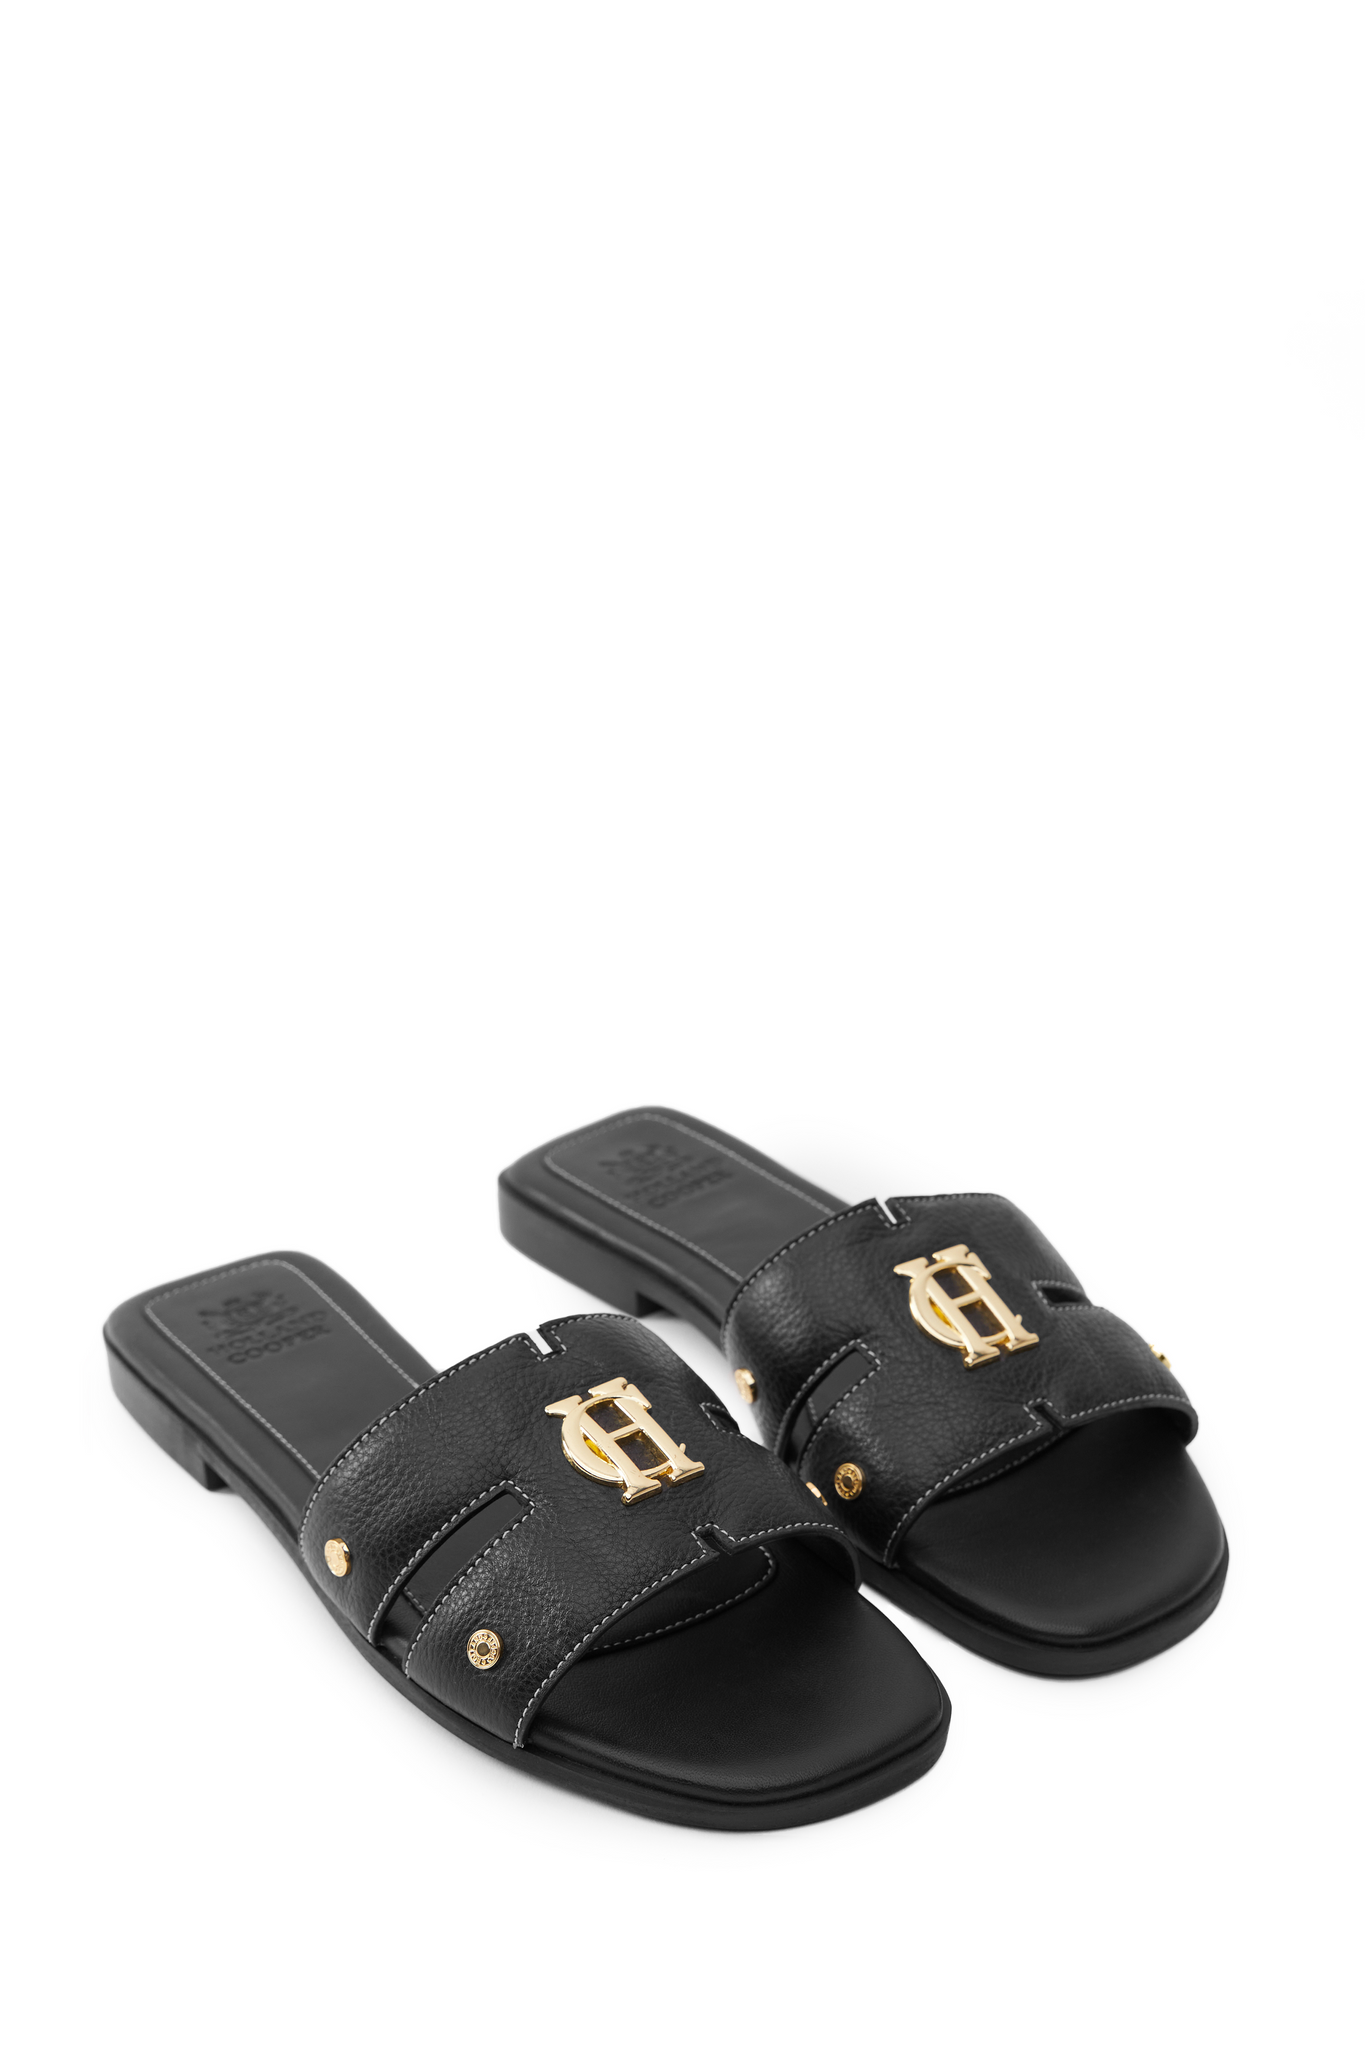 black leather sliders with contrast white stitching, a black leather sole and gold hardware